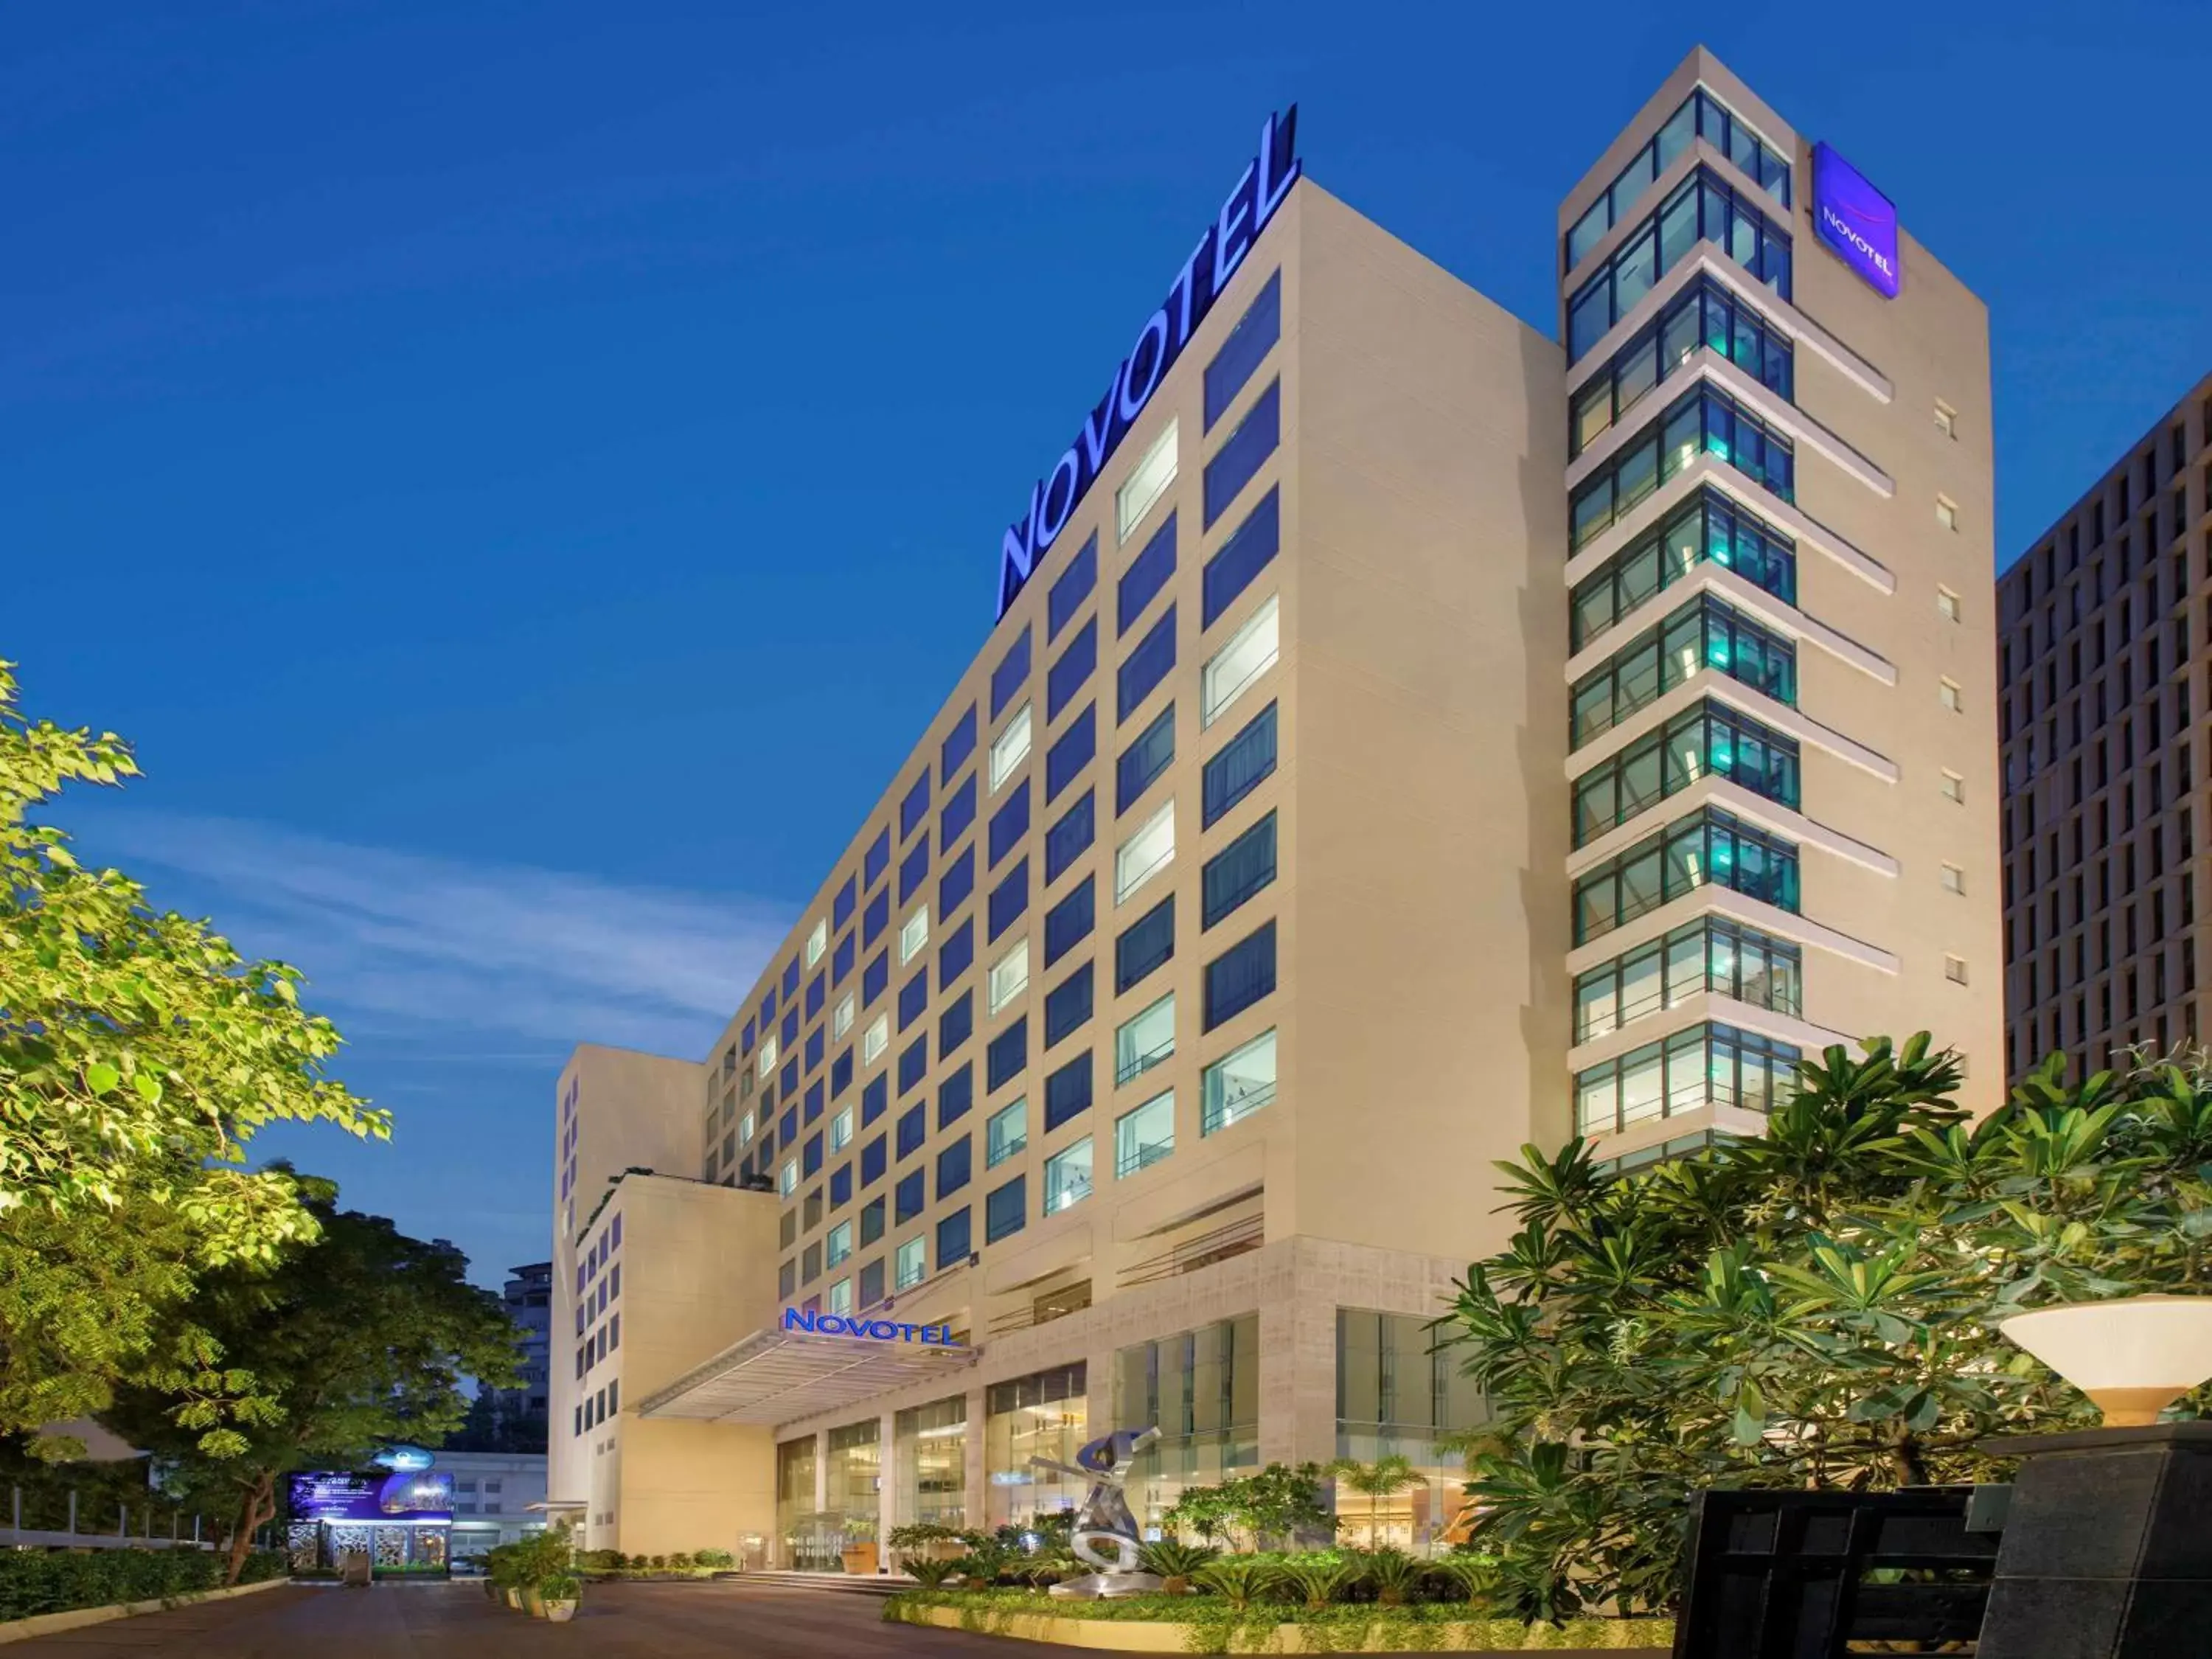 Property building in Novotel Ahmedabad